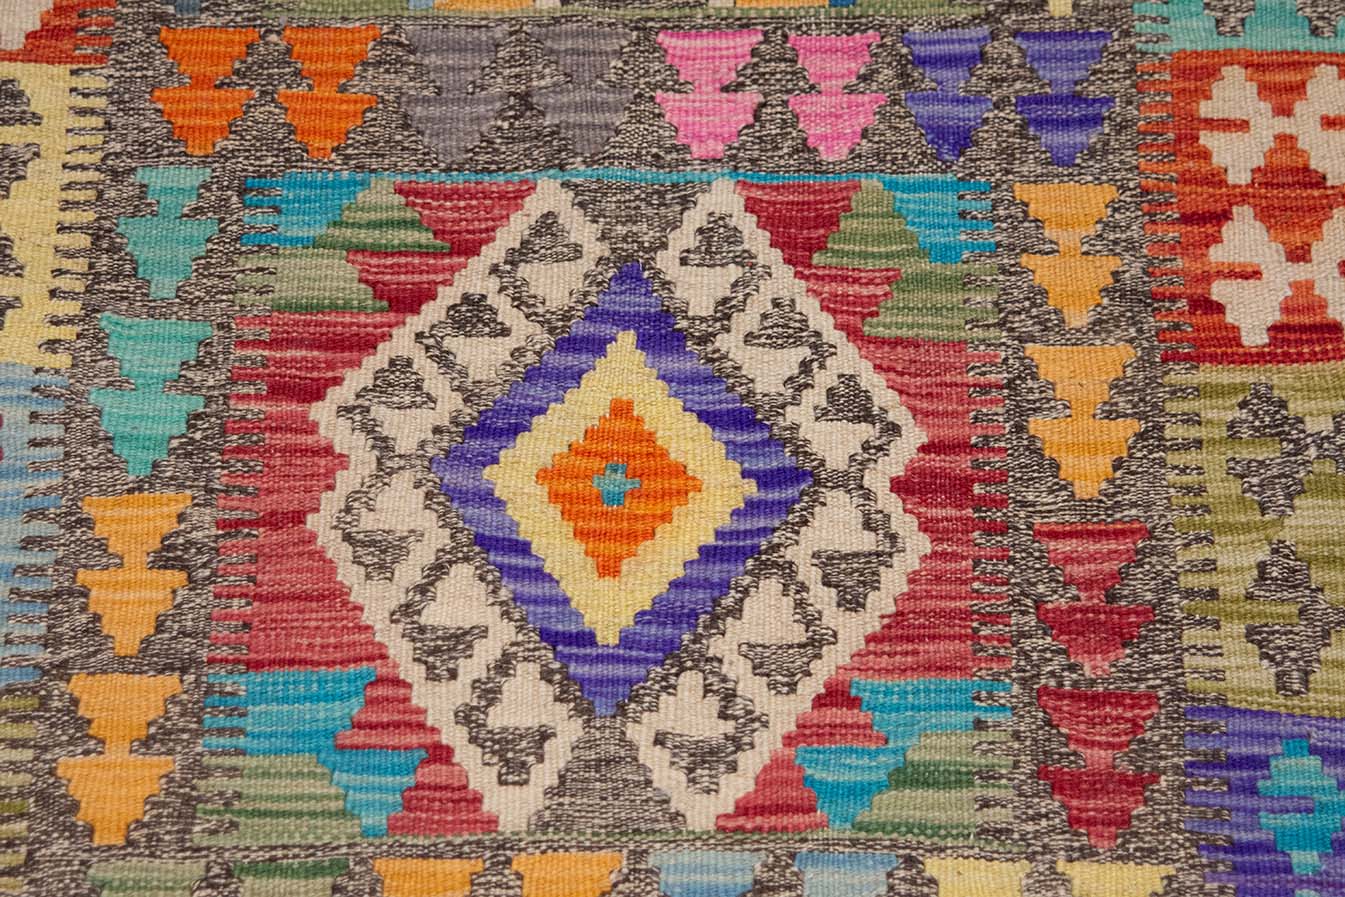 Kilim Rugs in Chicago - Where to Buy Rugs and Kilims in Chicago